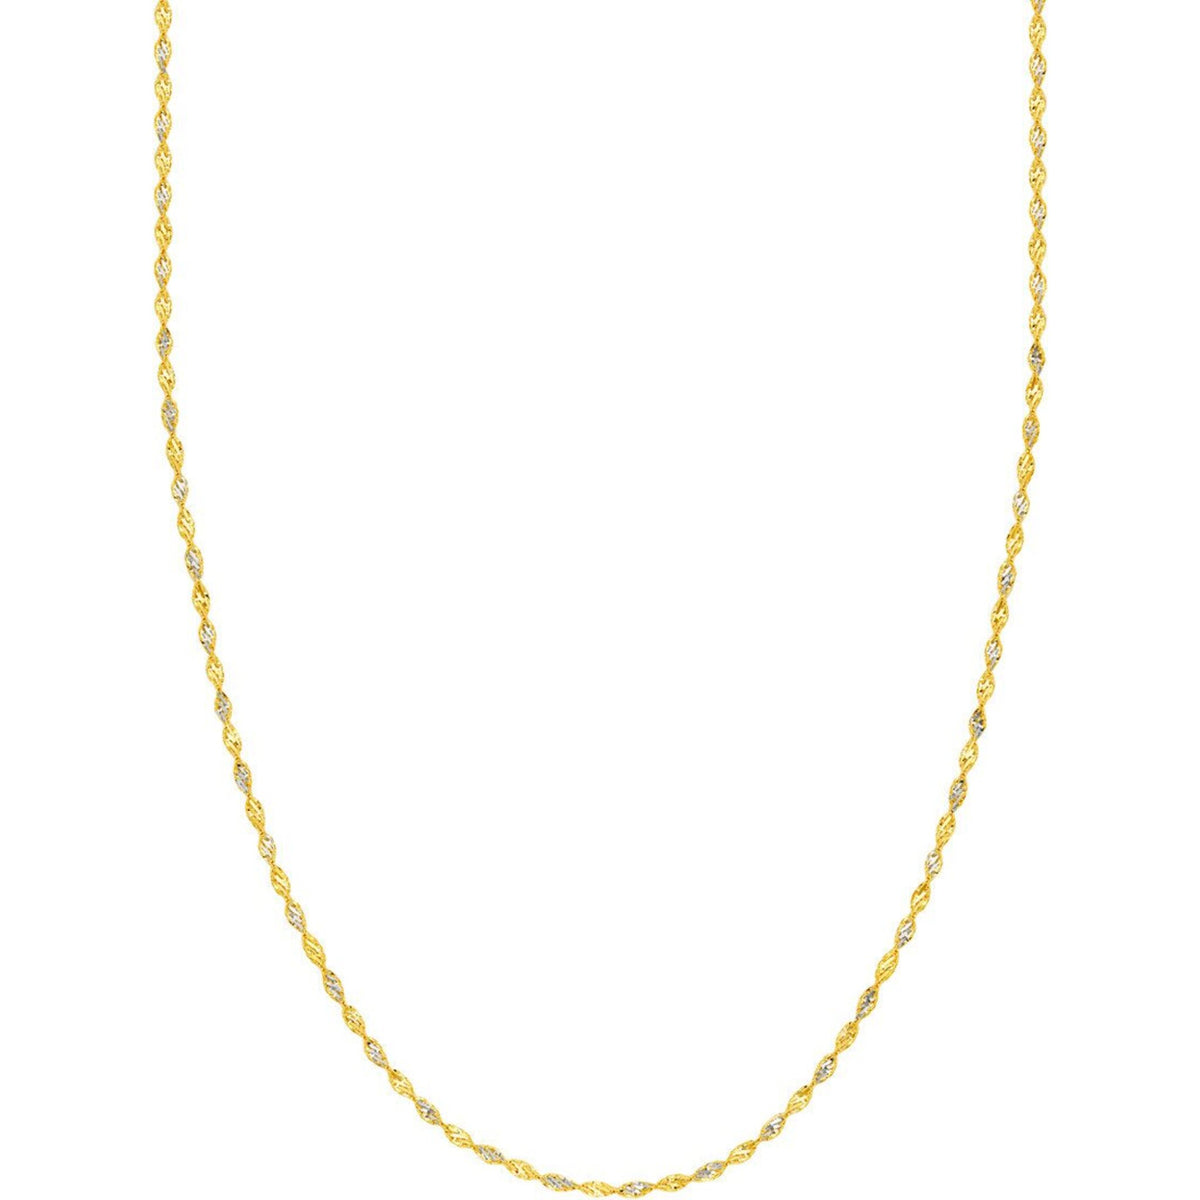 Olas d'Oro 24" Necklace - 14K Yellow/White Gold 2.10mm Yellow/White Dorica Chain with Lobster Lock